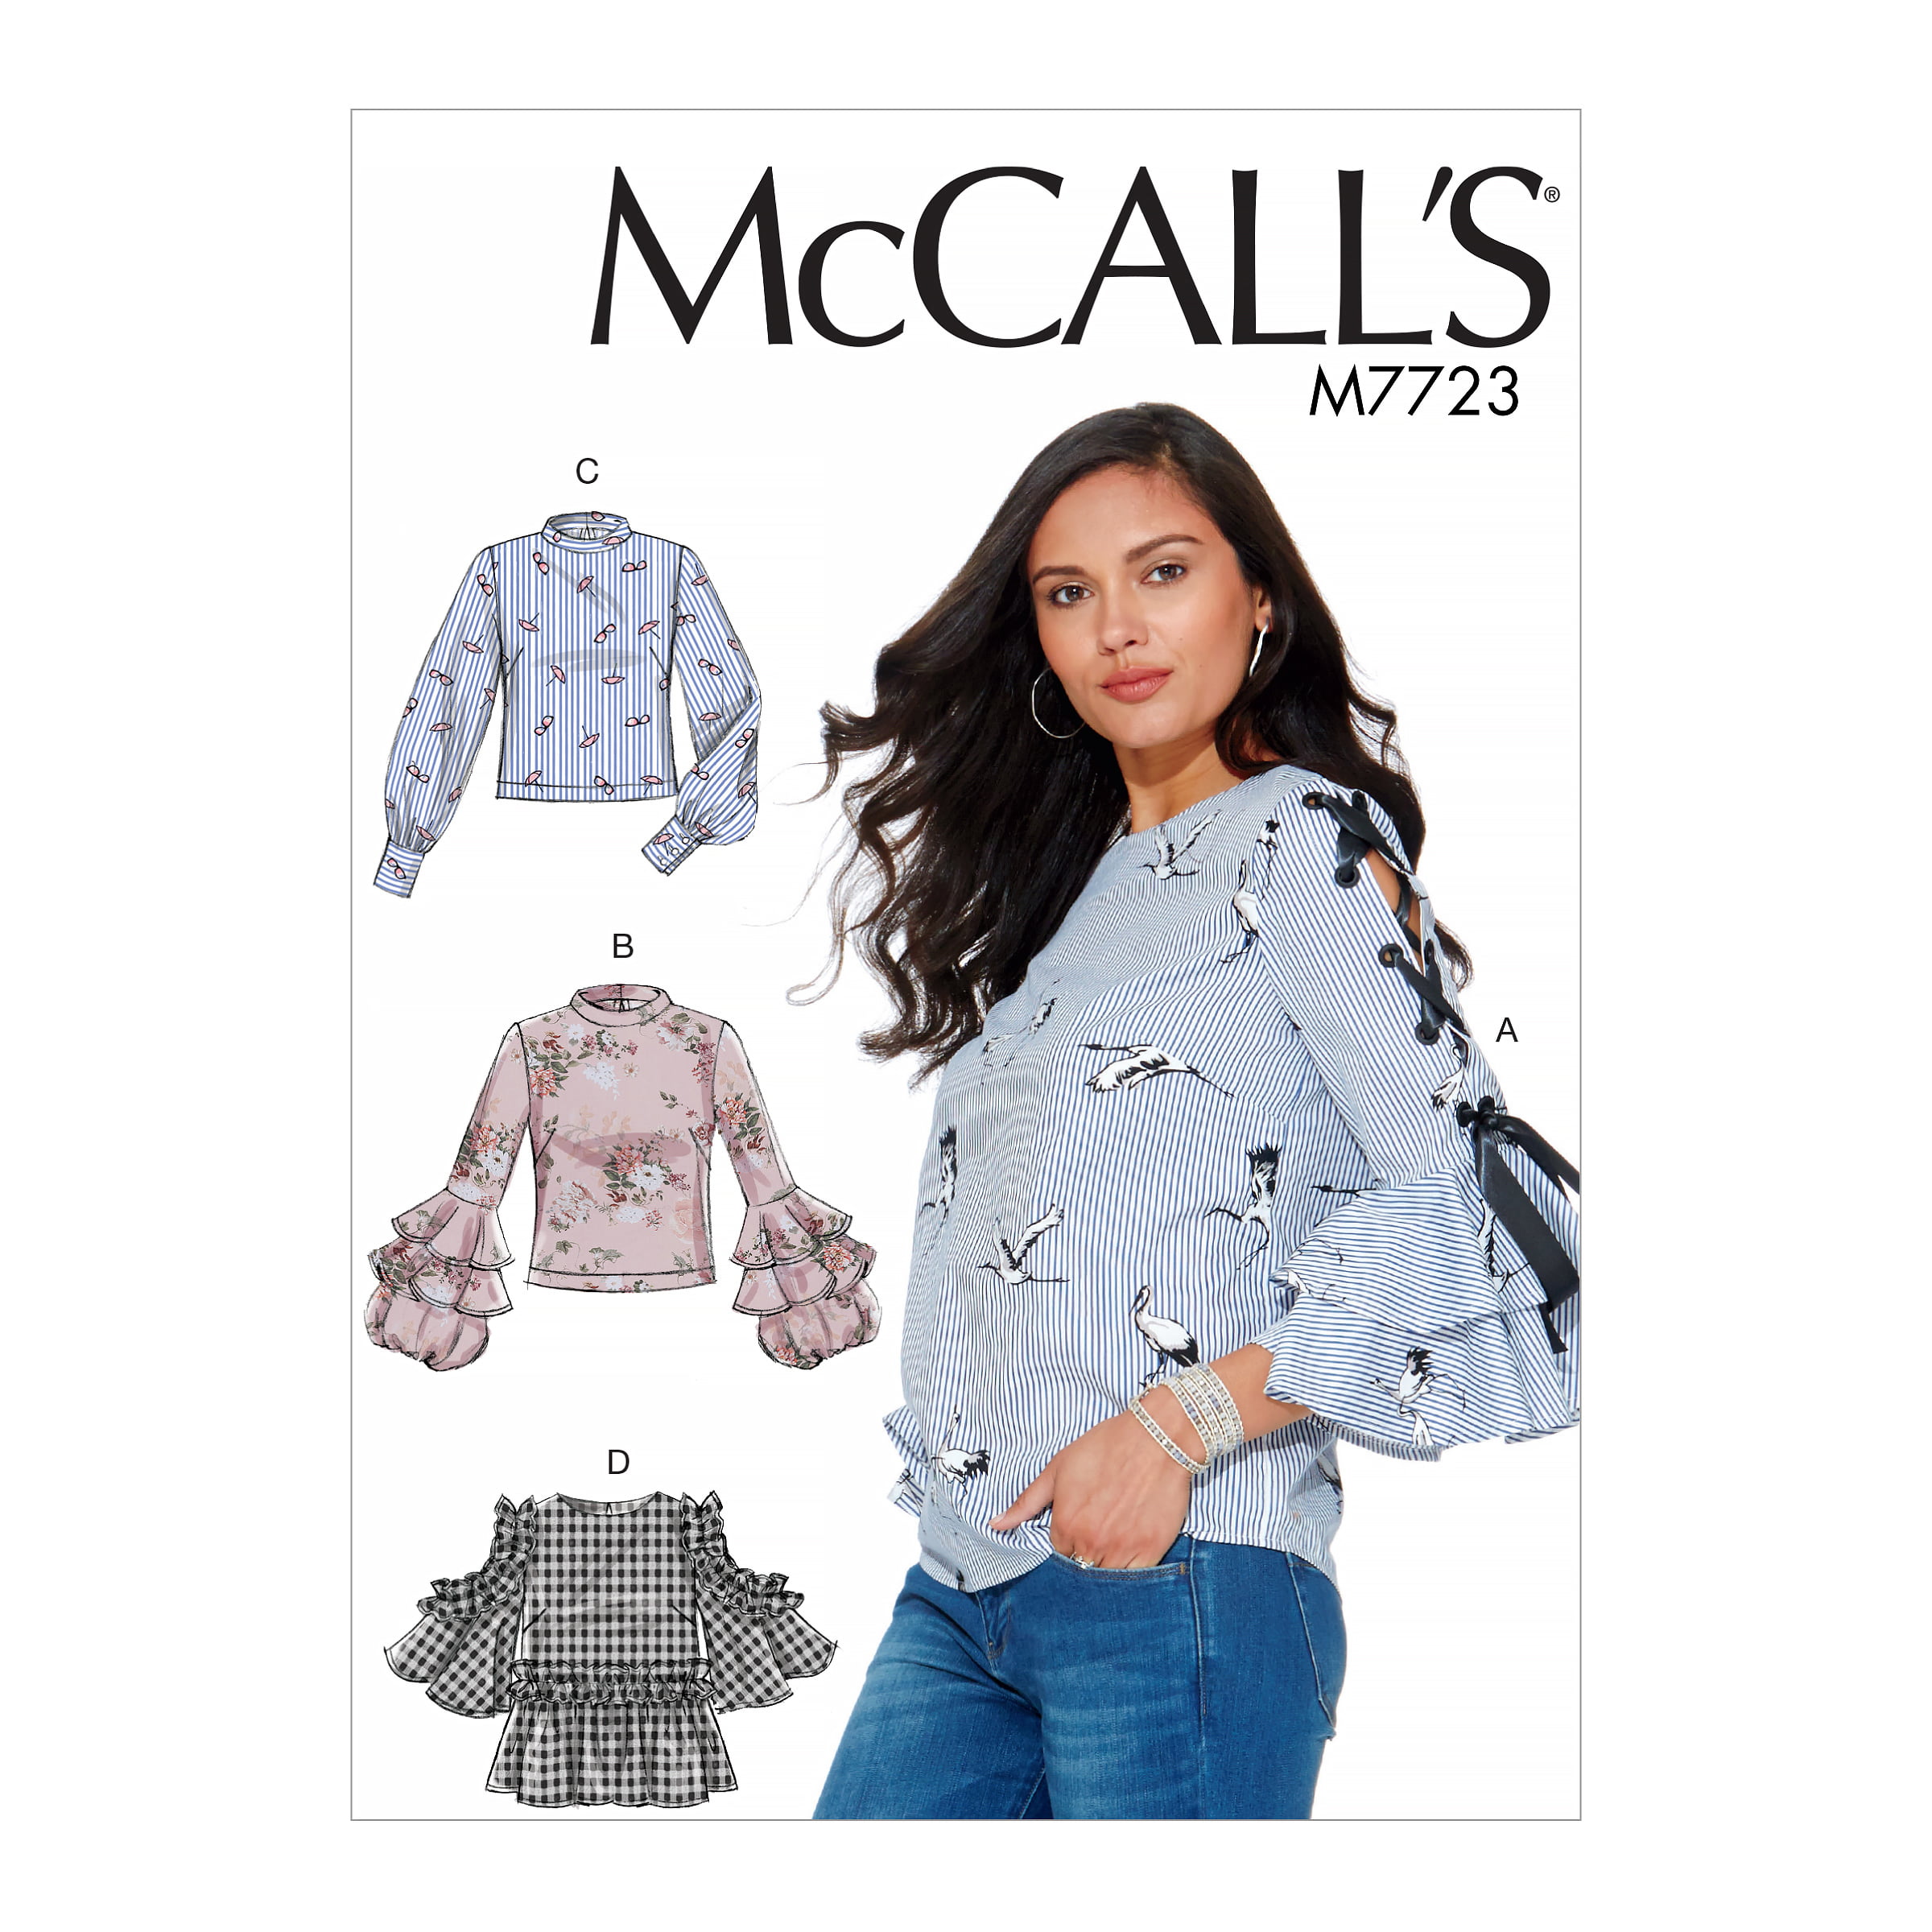 McCall's Sewing Pattern Misses' Tops-14-16-18-20-22 - Walmart.com ...